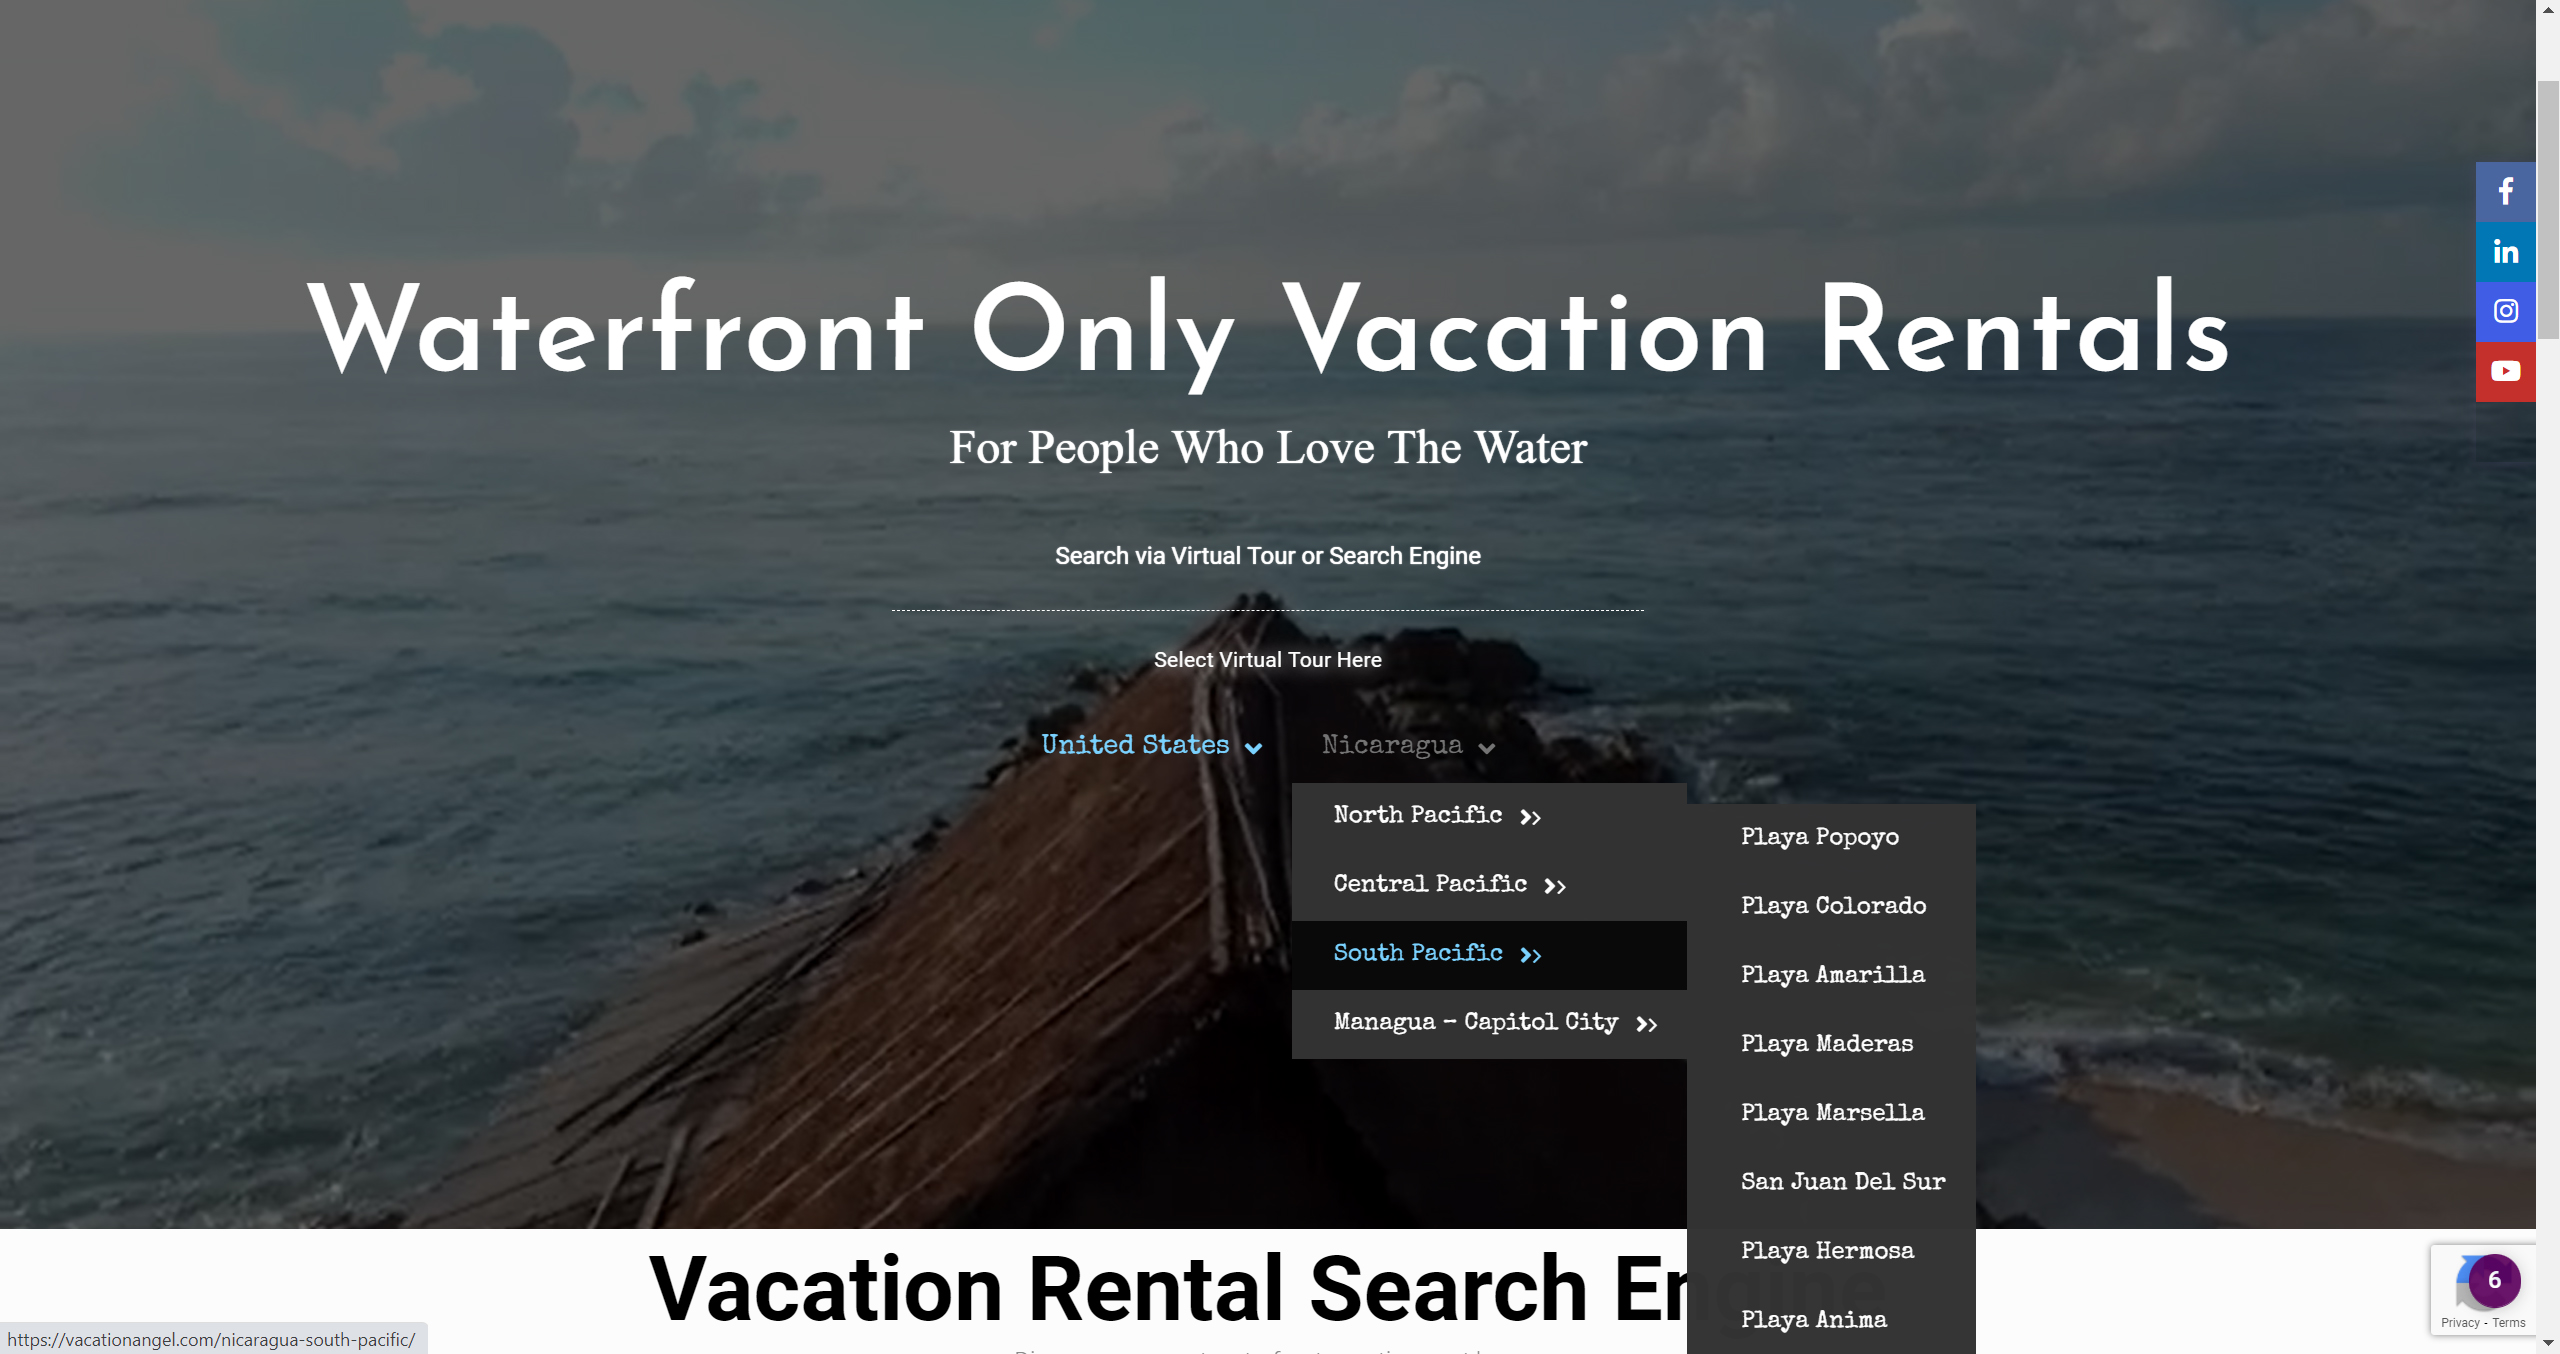 Nicaragua Vacation Rentals will benefit from a new generation website for promotion.